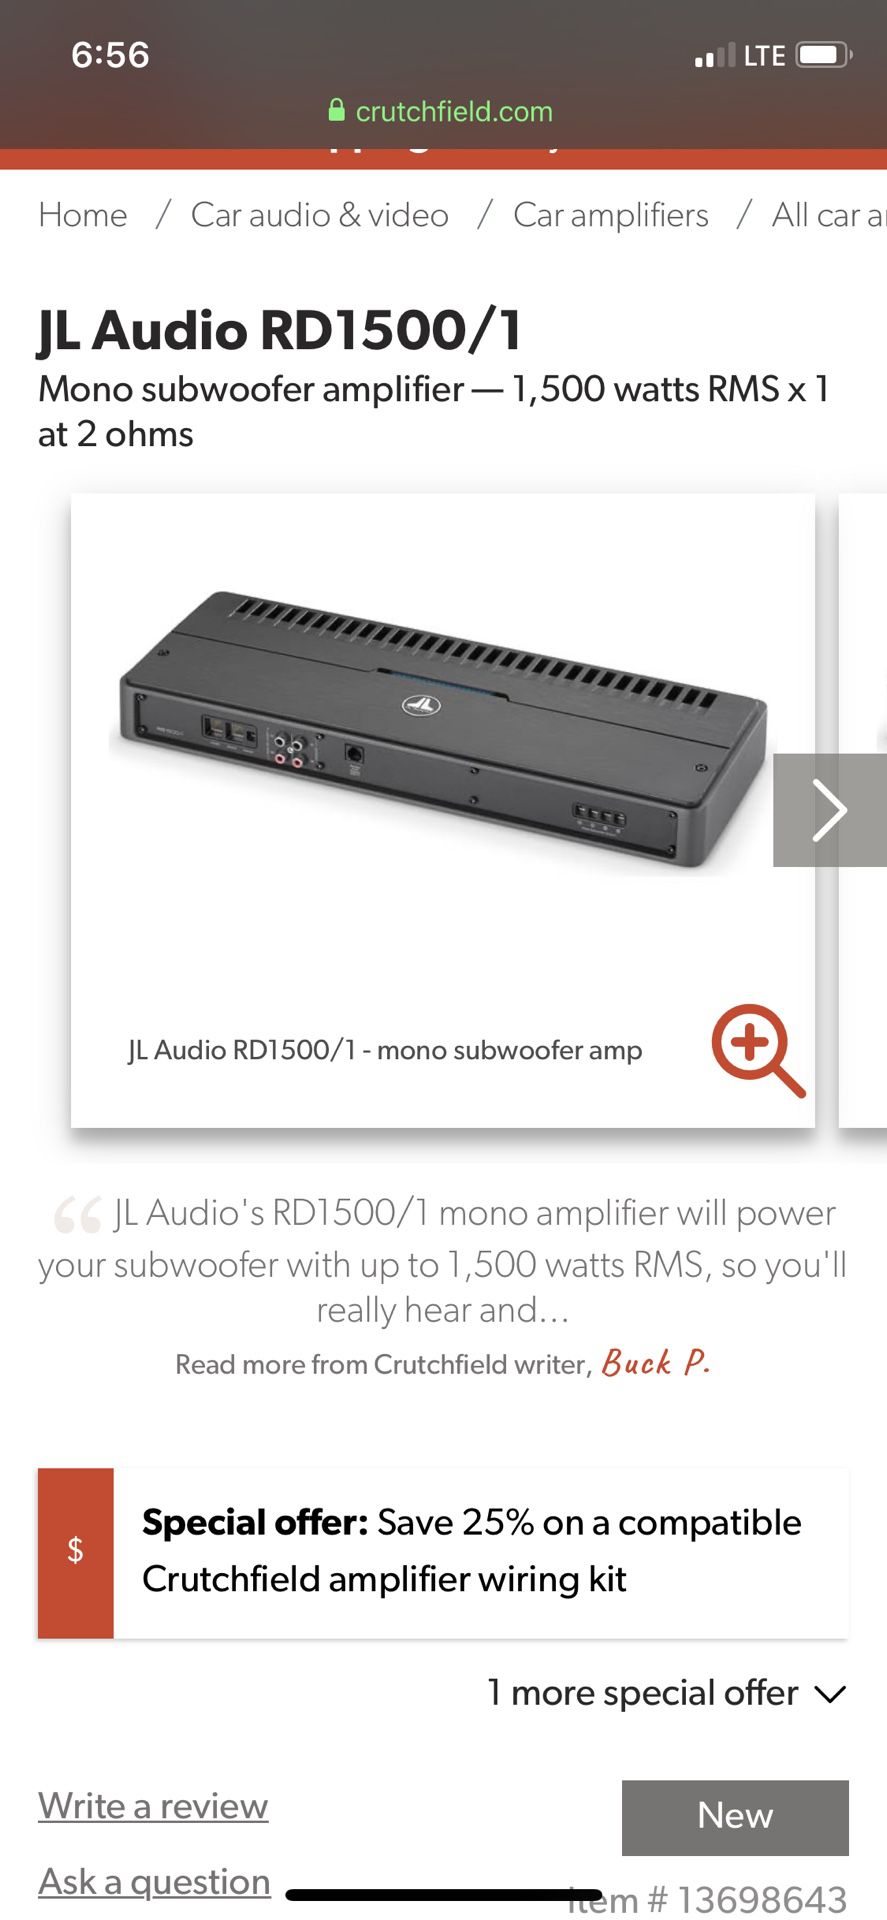 JL Audio RD1500/1 Mono subwoofer amplifier — 1,500 watts RMS x 1 at 2 ohms  at Crutchfield